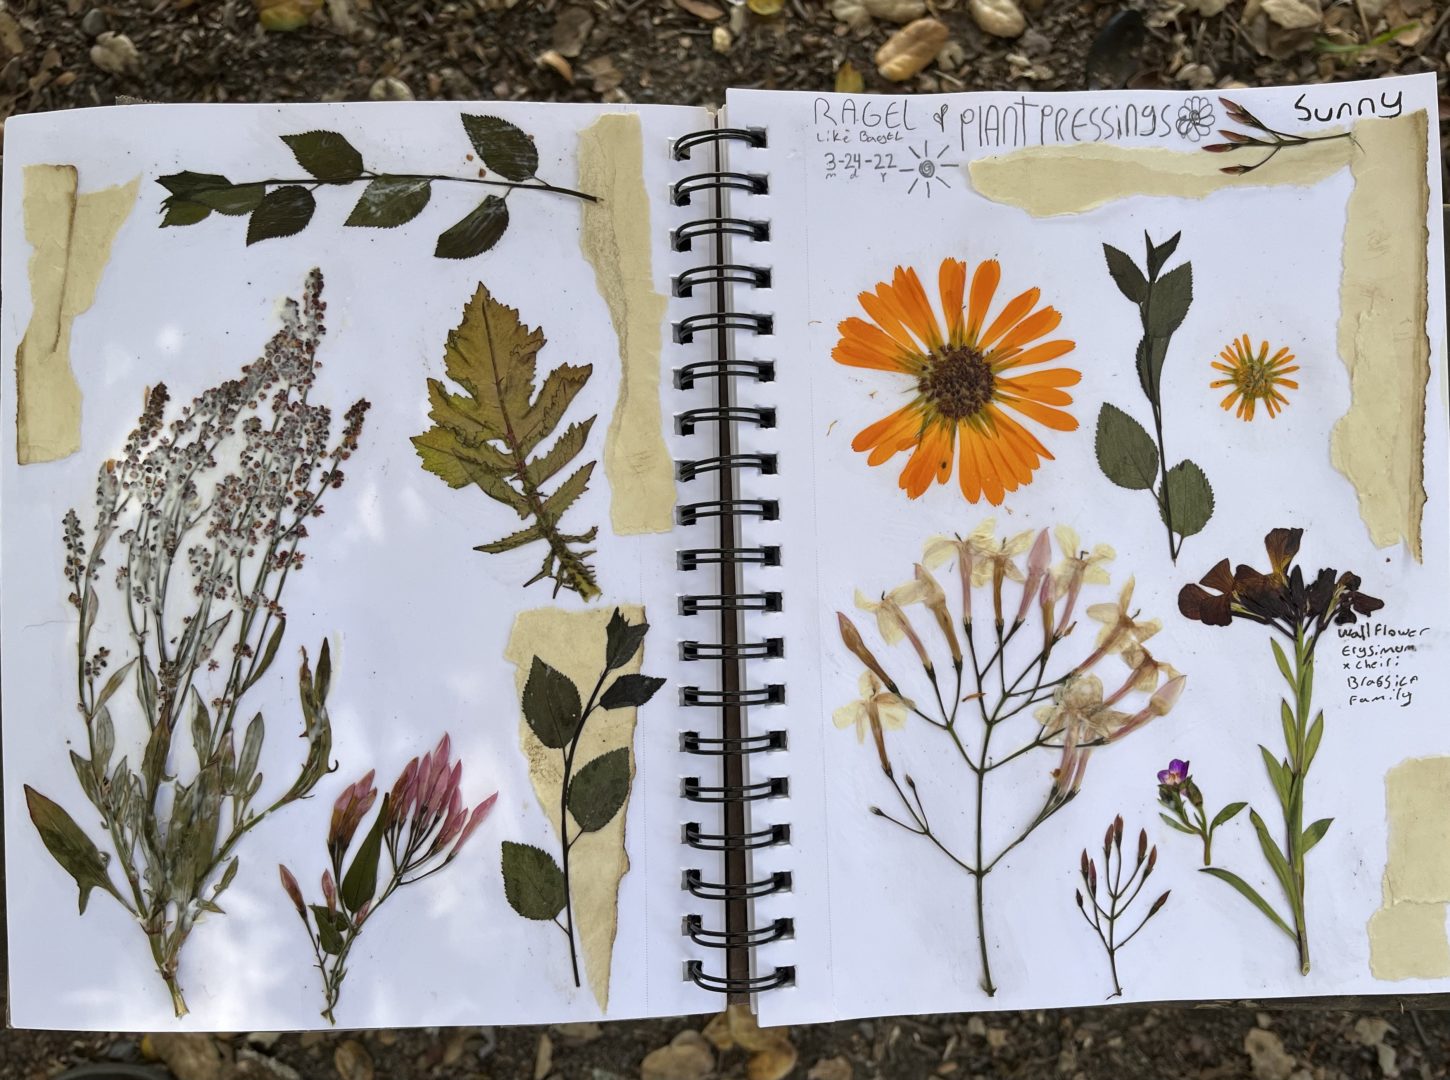 This is an example of flower pressing and nature journaling showing a two page nature journal spread with a variety of pressed flowers and pressed plants in a sketchbook.